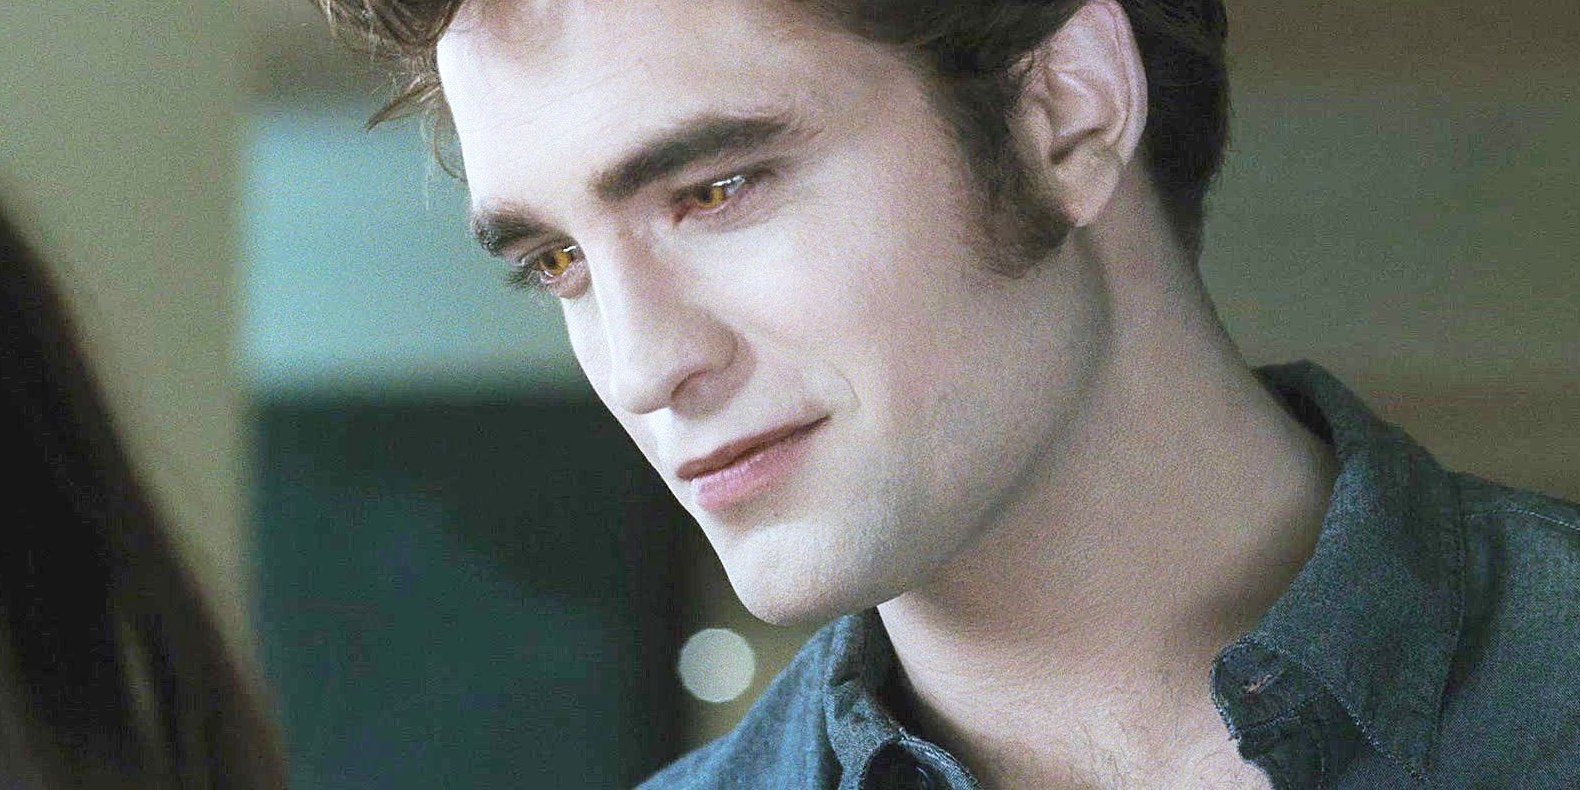 10 Quotes From The Twilight Book Series We Wish Were In The Movies